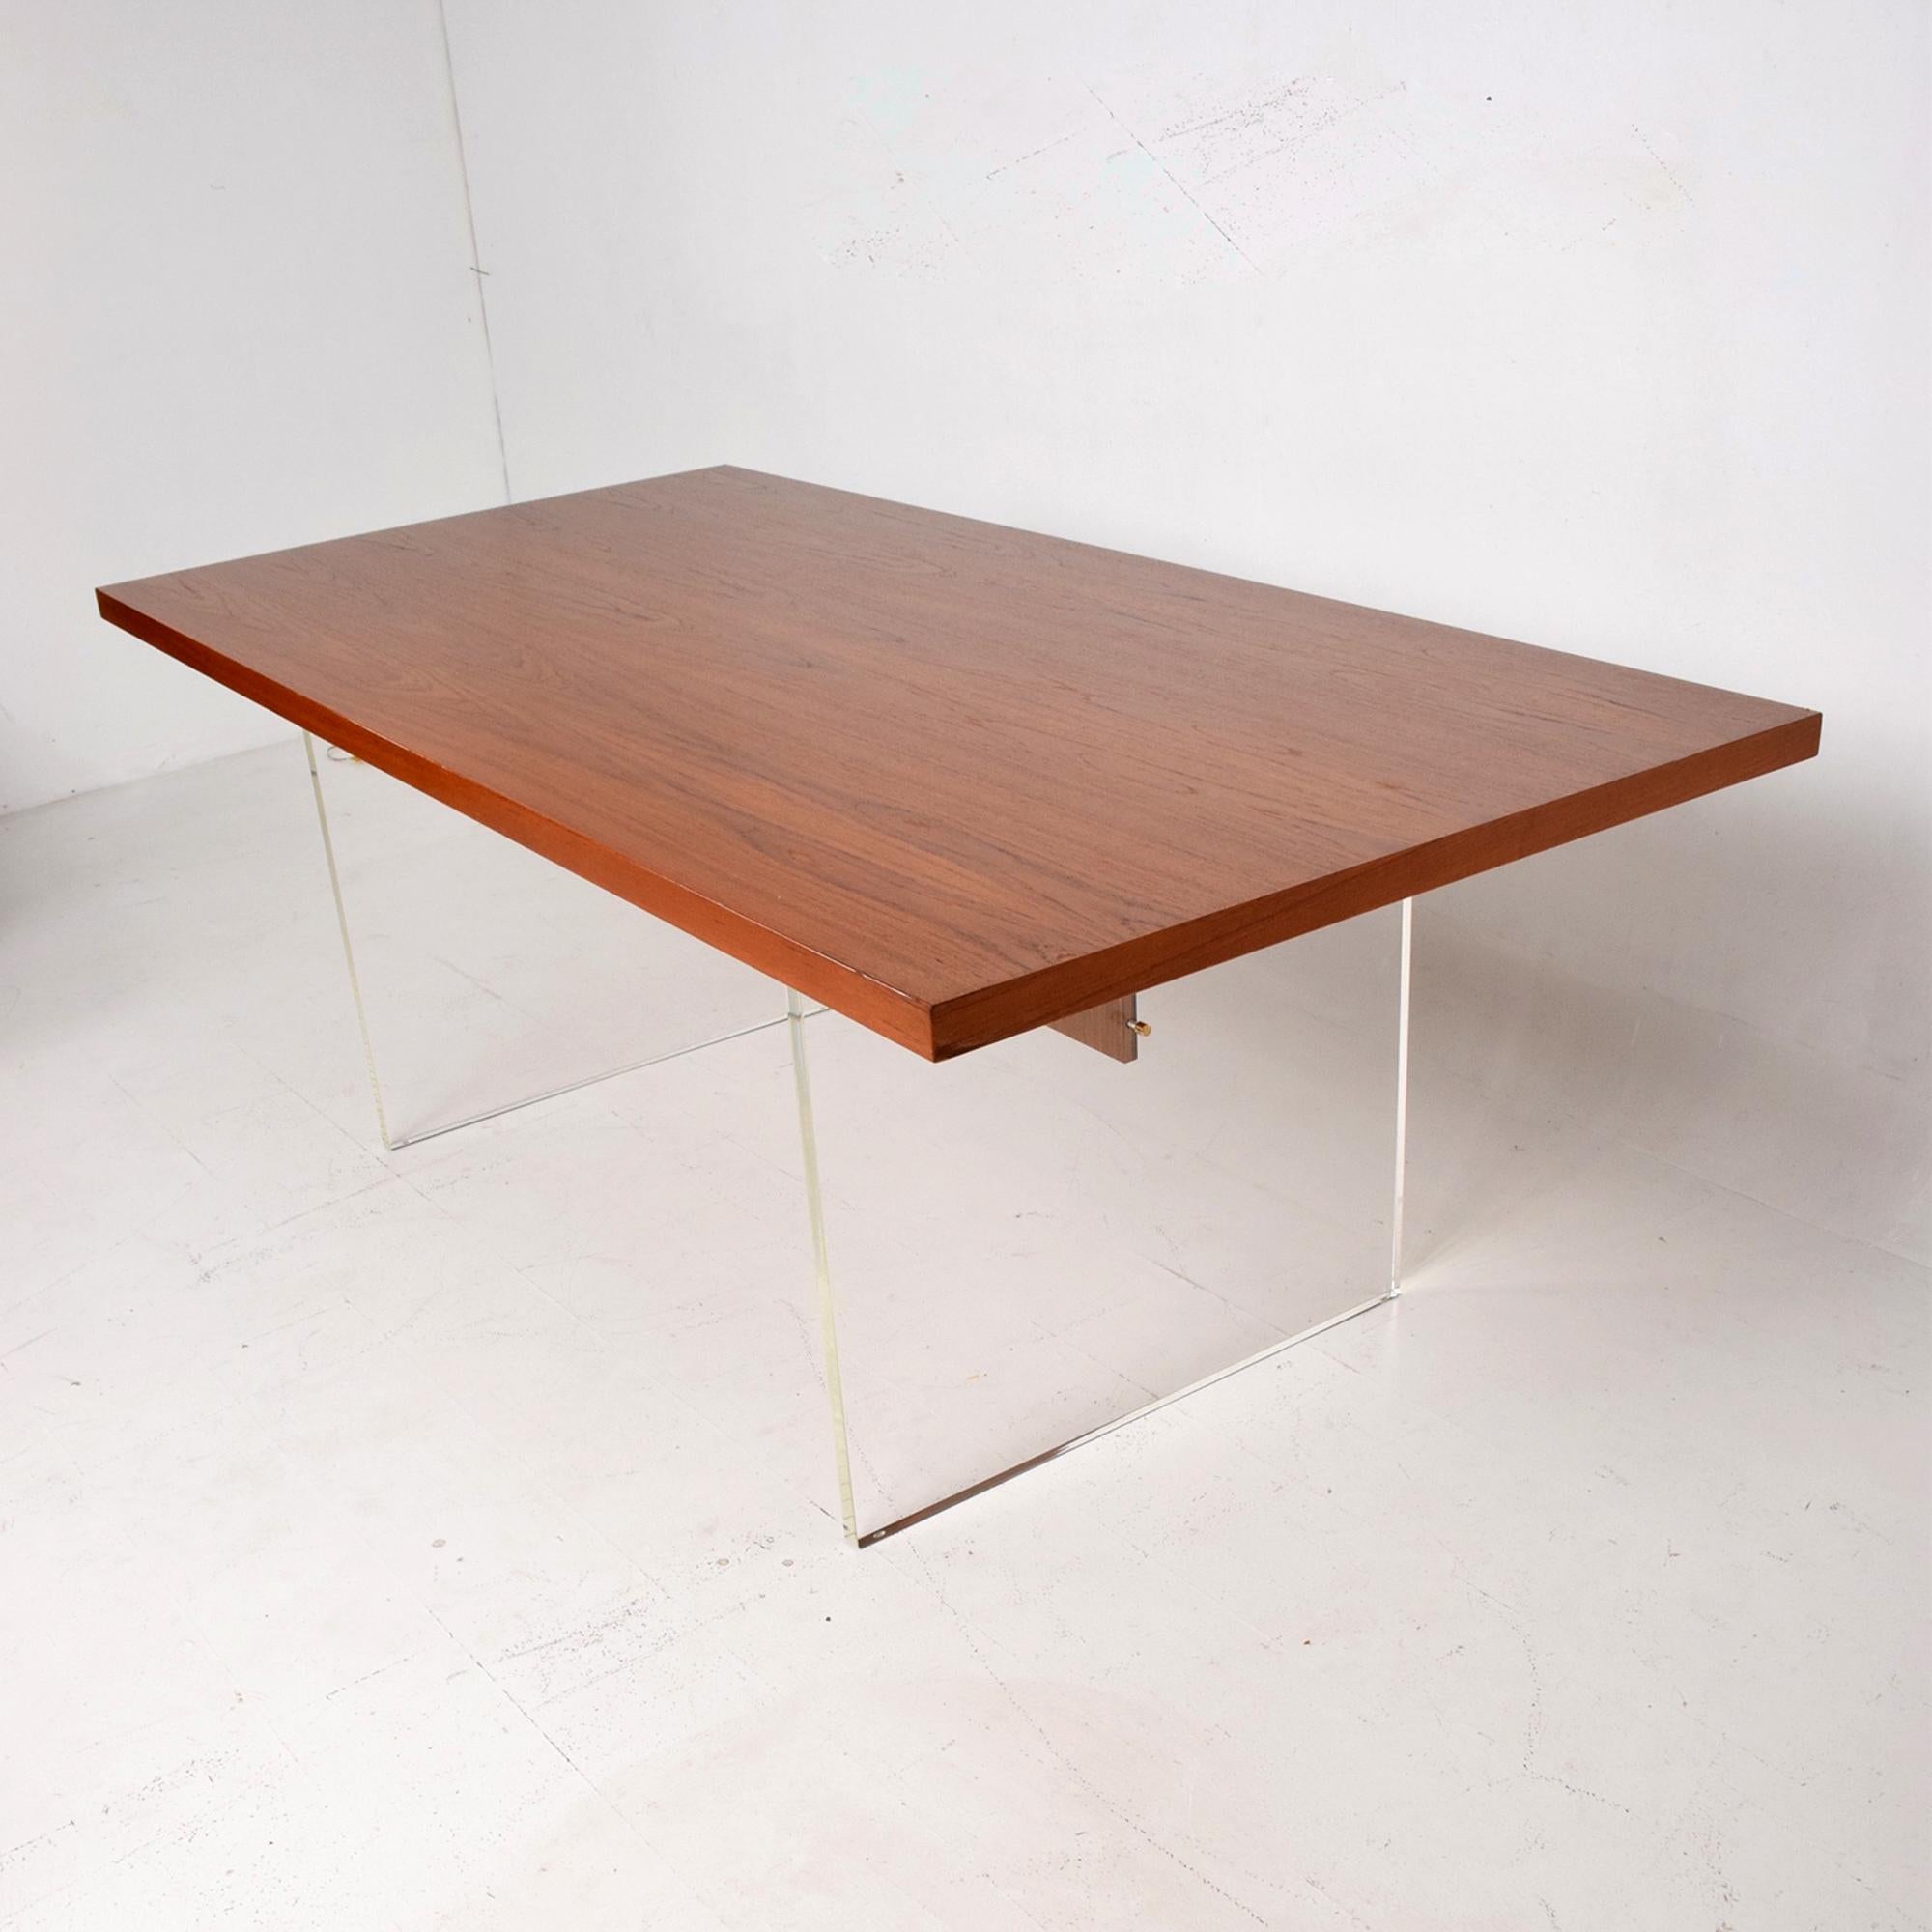 American 1970s Modern Dining Conference Table Style of Hans Wegner Teakwood and Lucite